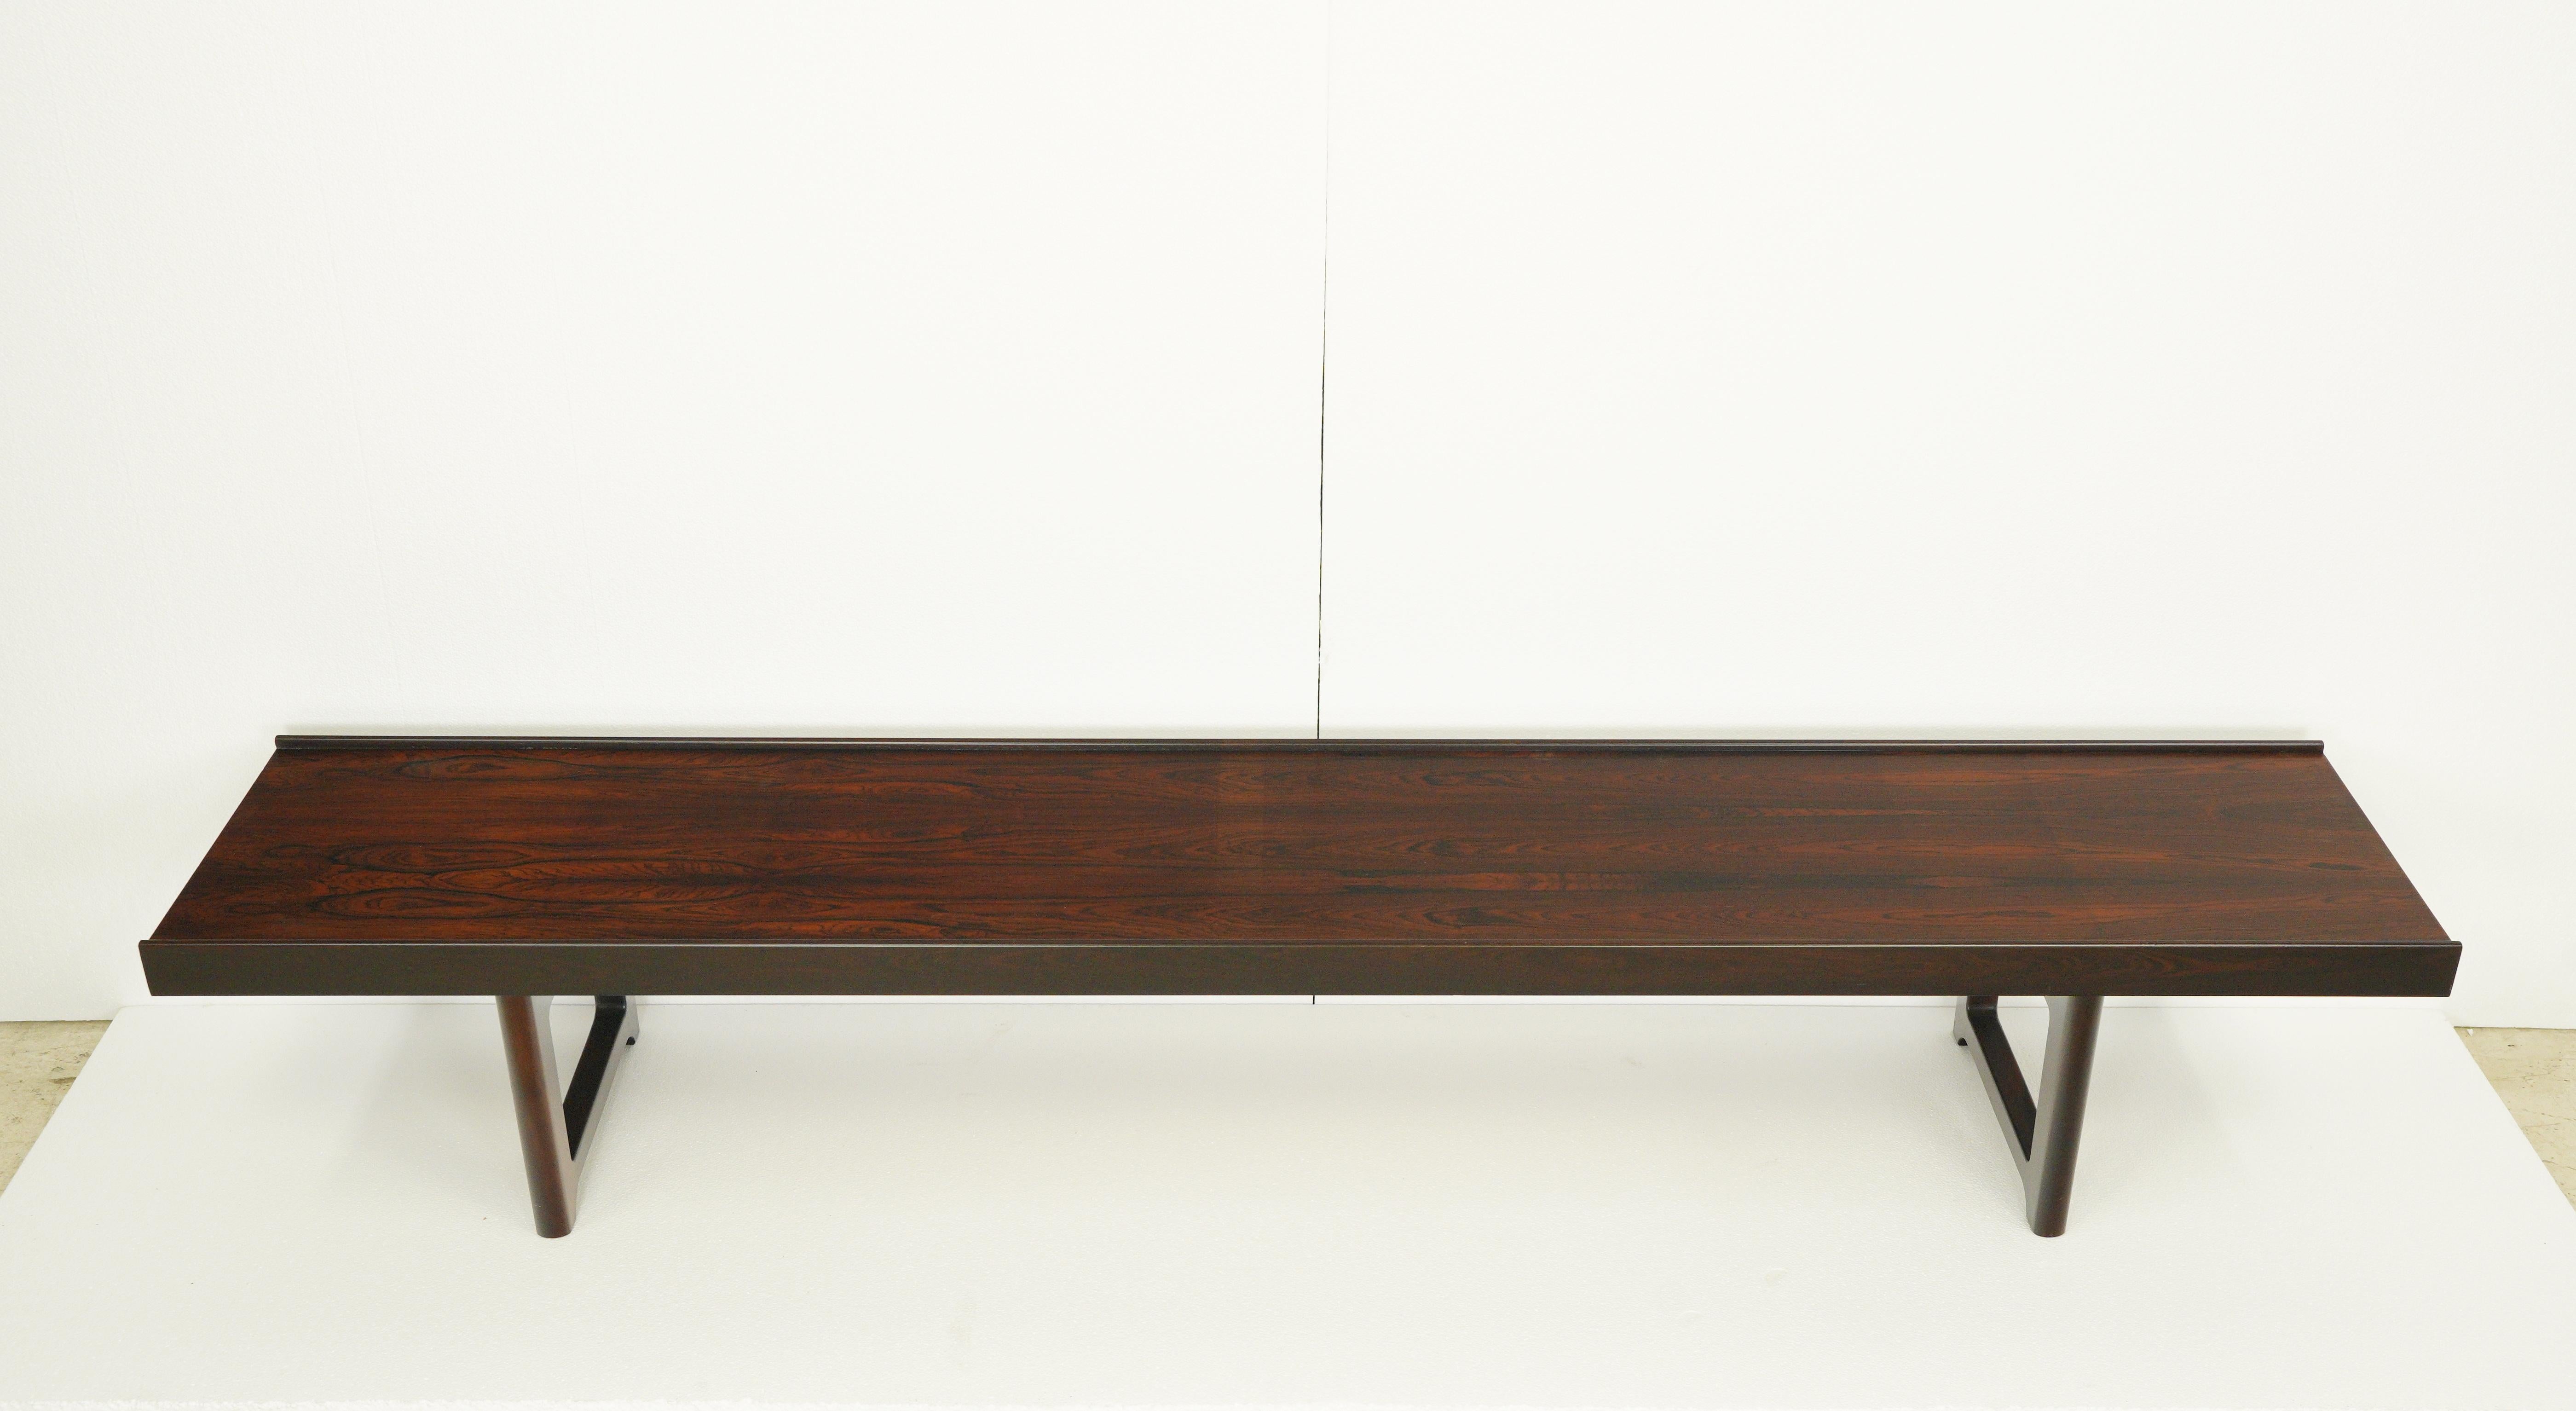 Made in Norway by Mellemstrands Trevareindustri. Designed by Torbjorn Afdal. This long bench is made of rosewood with black iron strapping. It can also be used as a coffee table. In excellent condition. One of the side pieces has a minor repair.